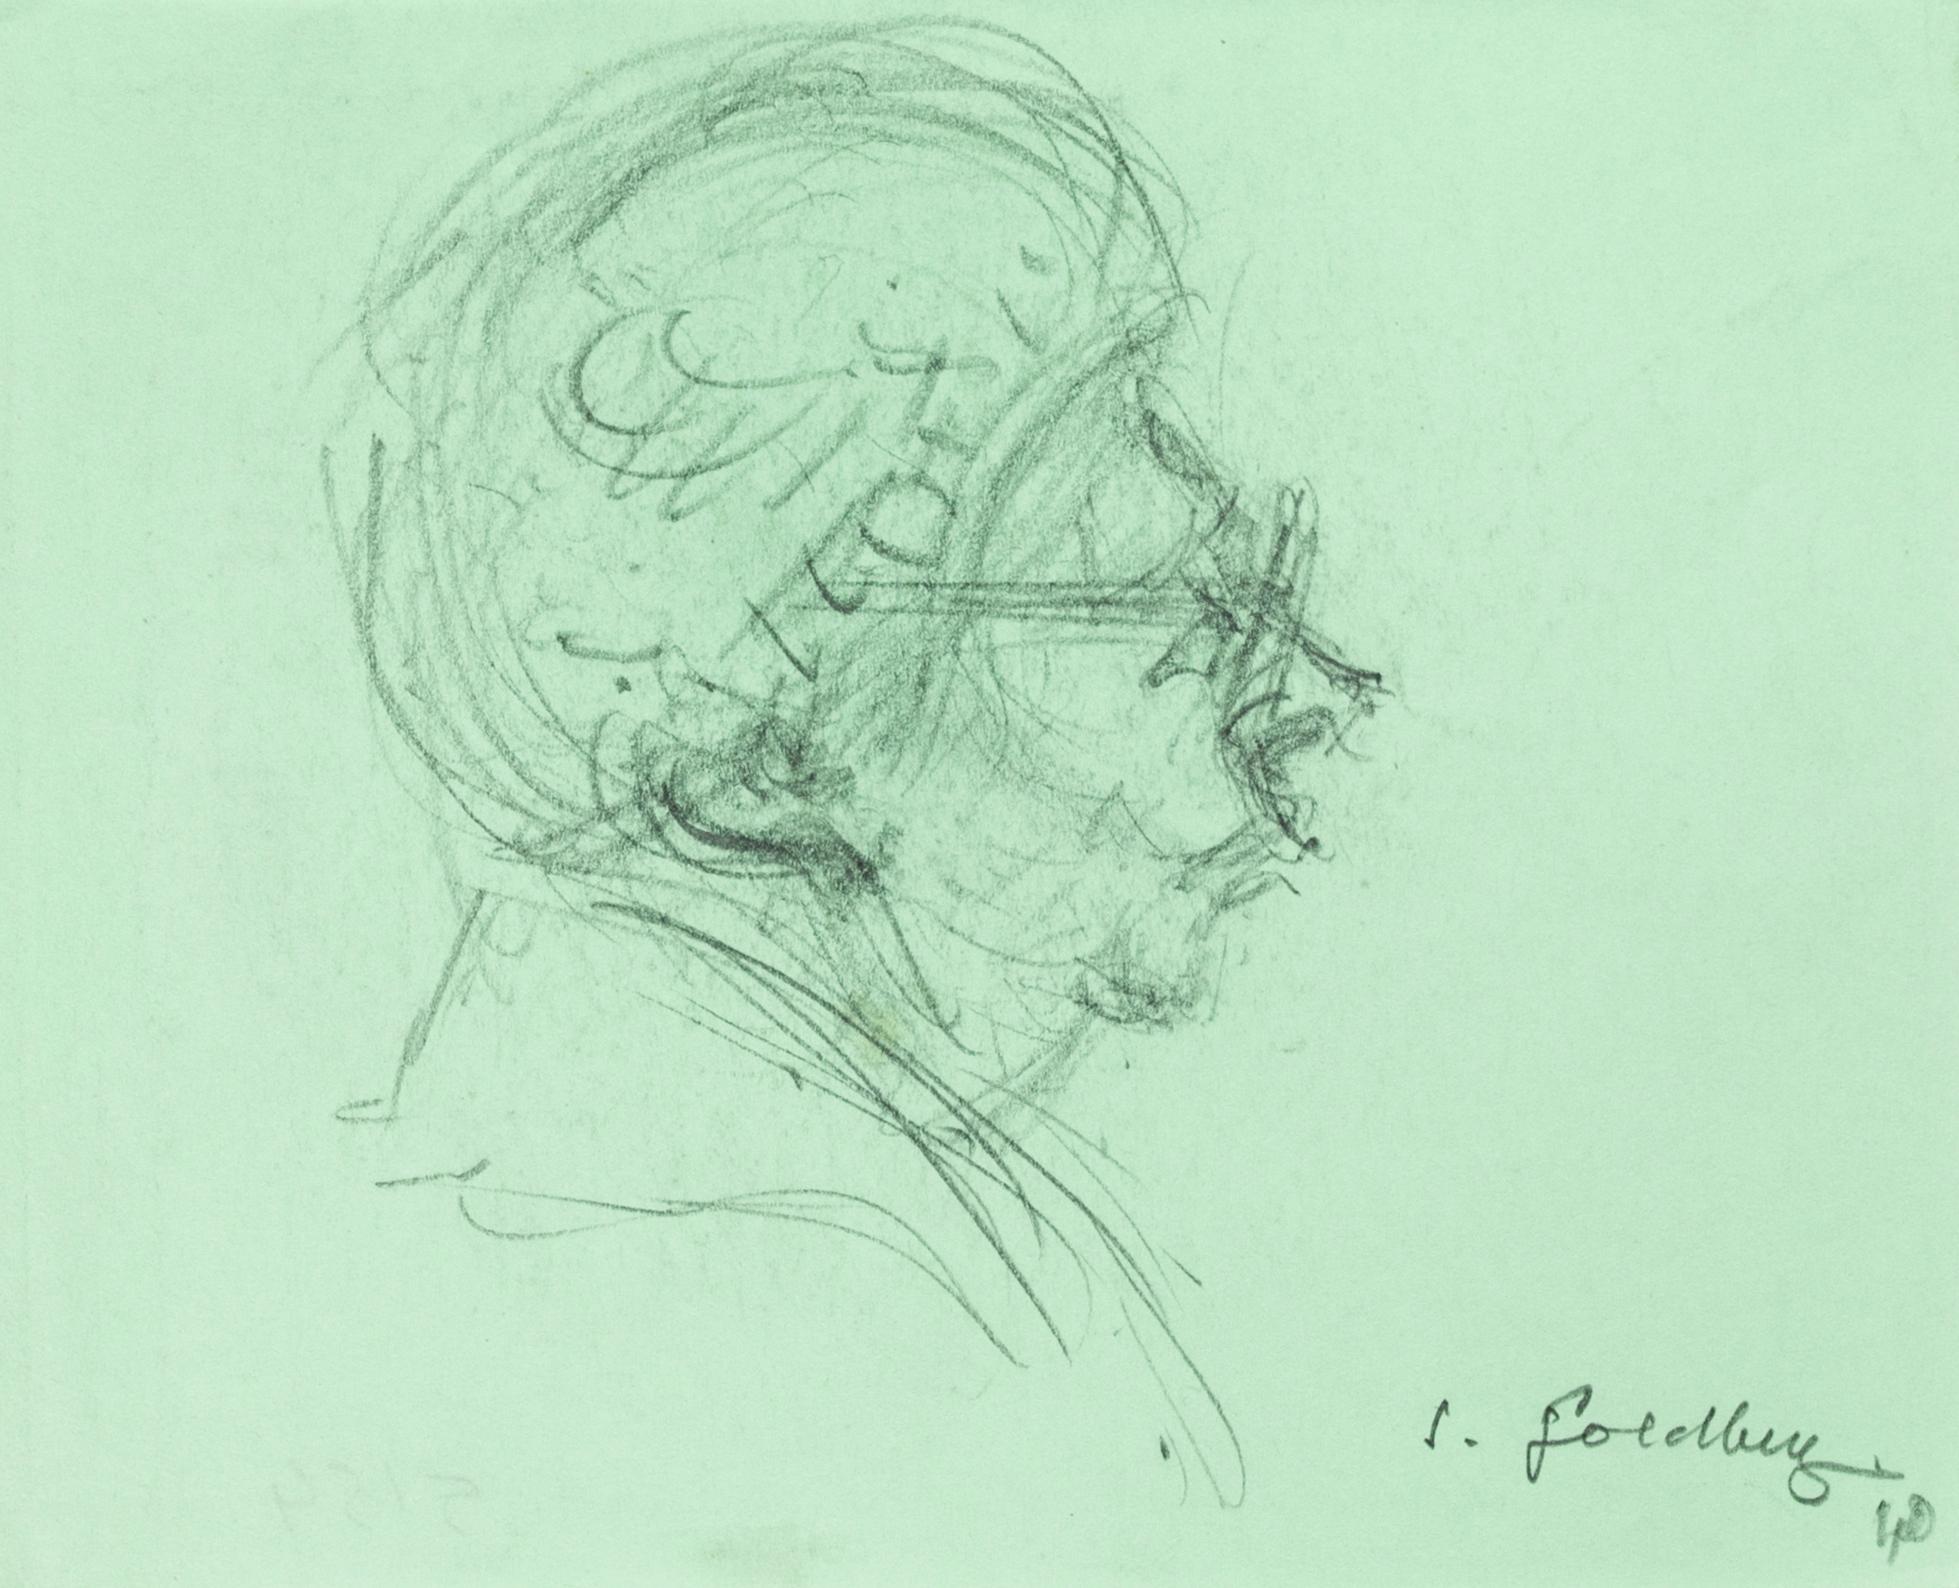 Old Woman - Original Pencil Drawing by S. Goldberg - Mid 20th Century